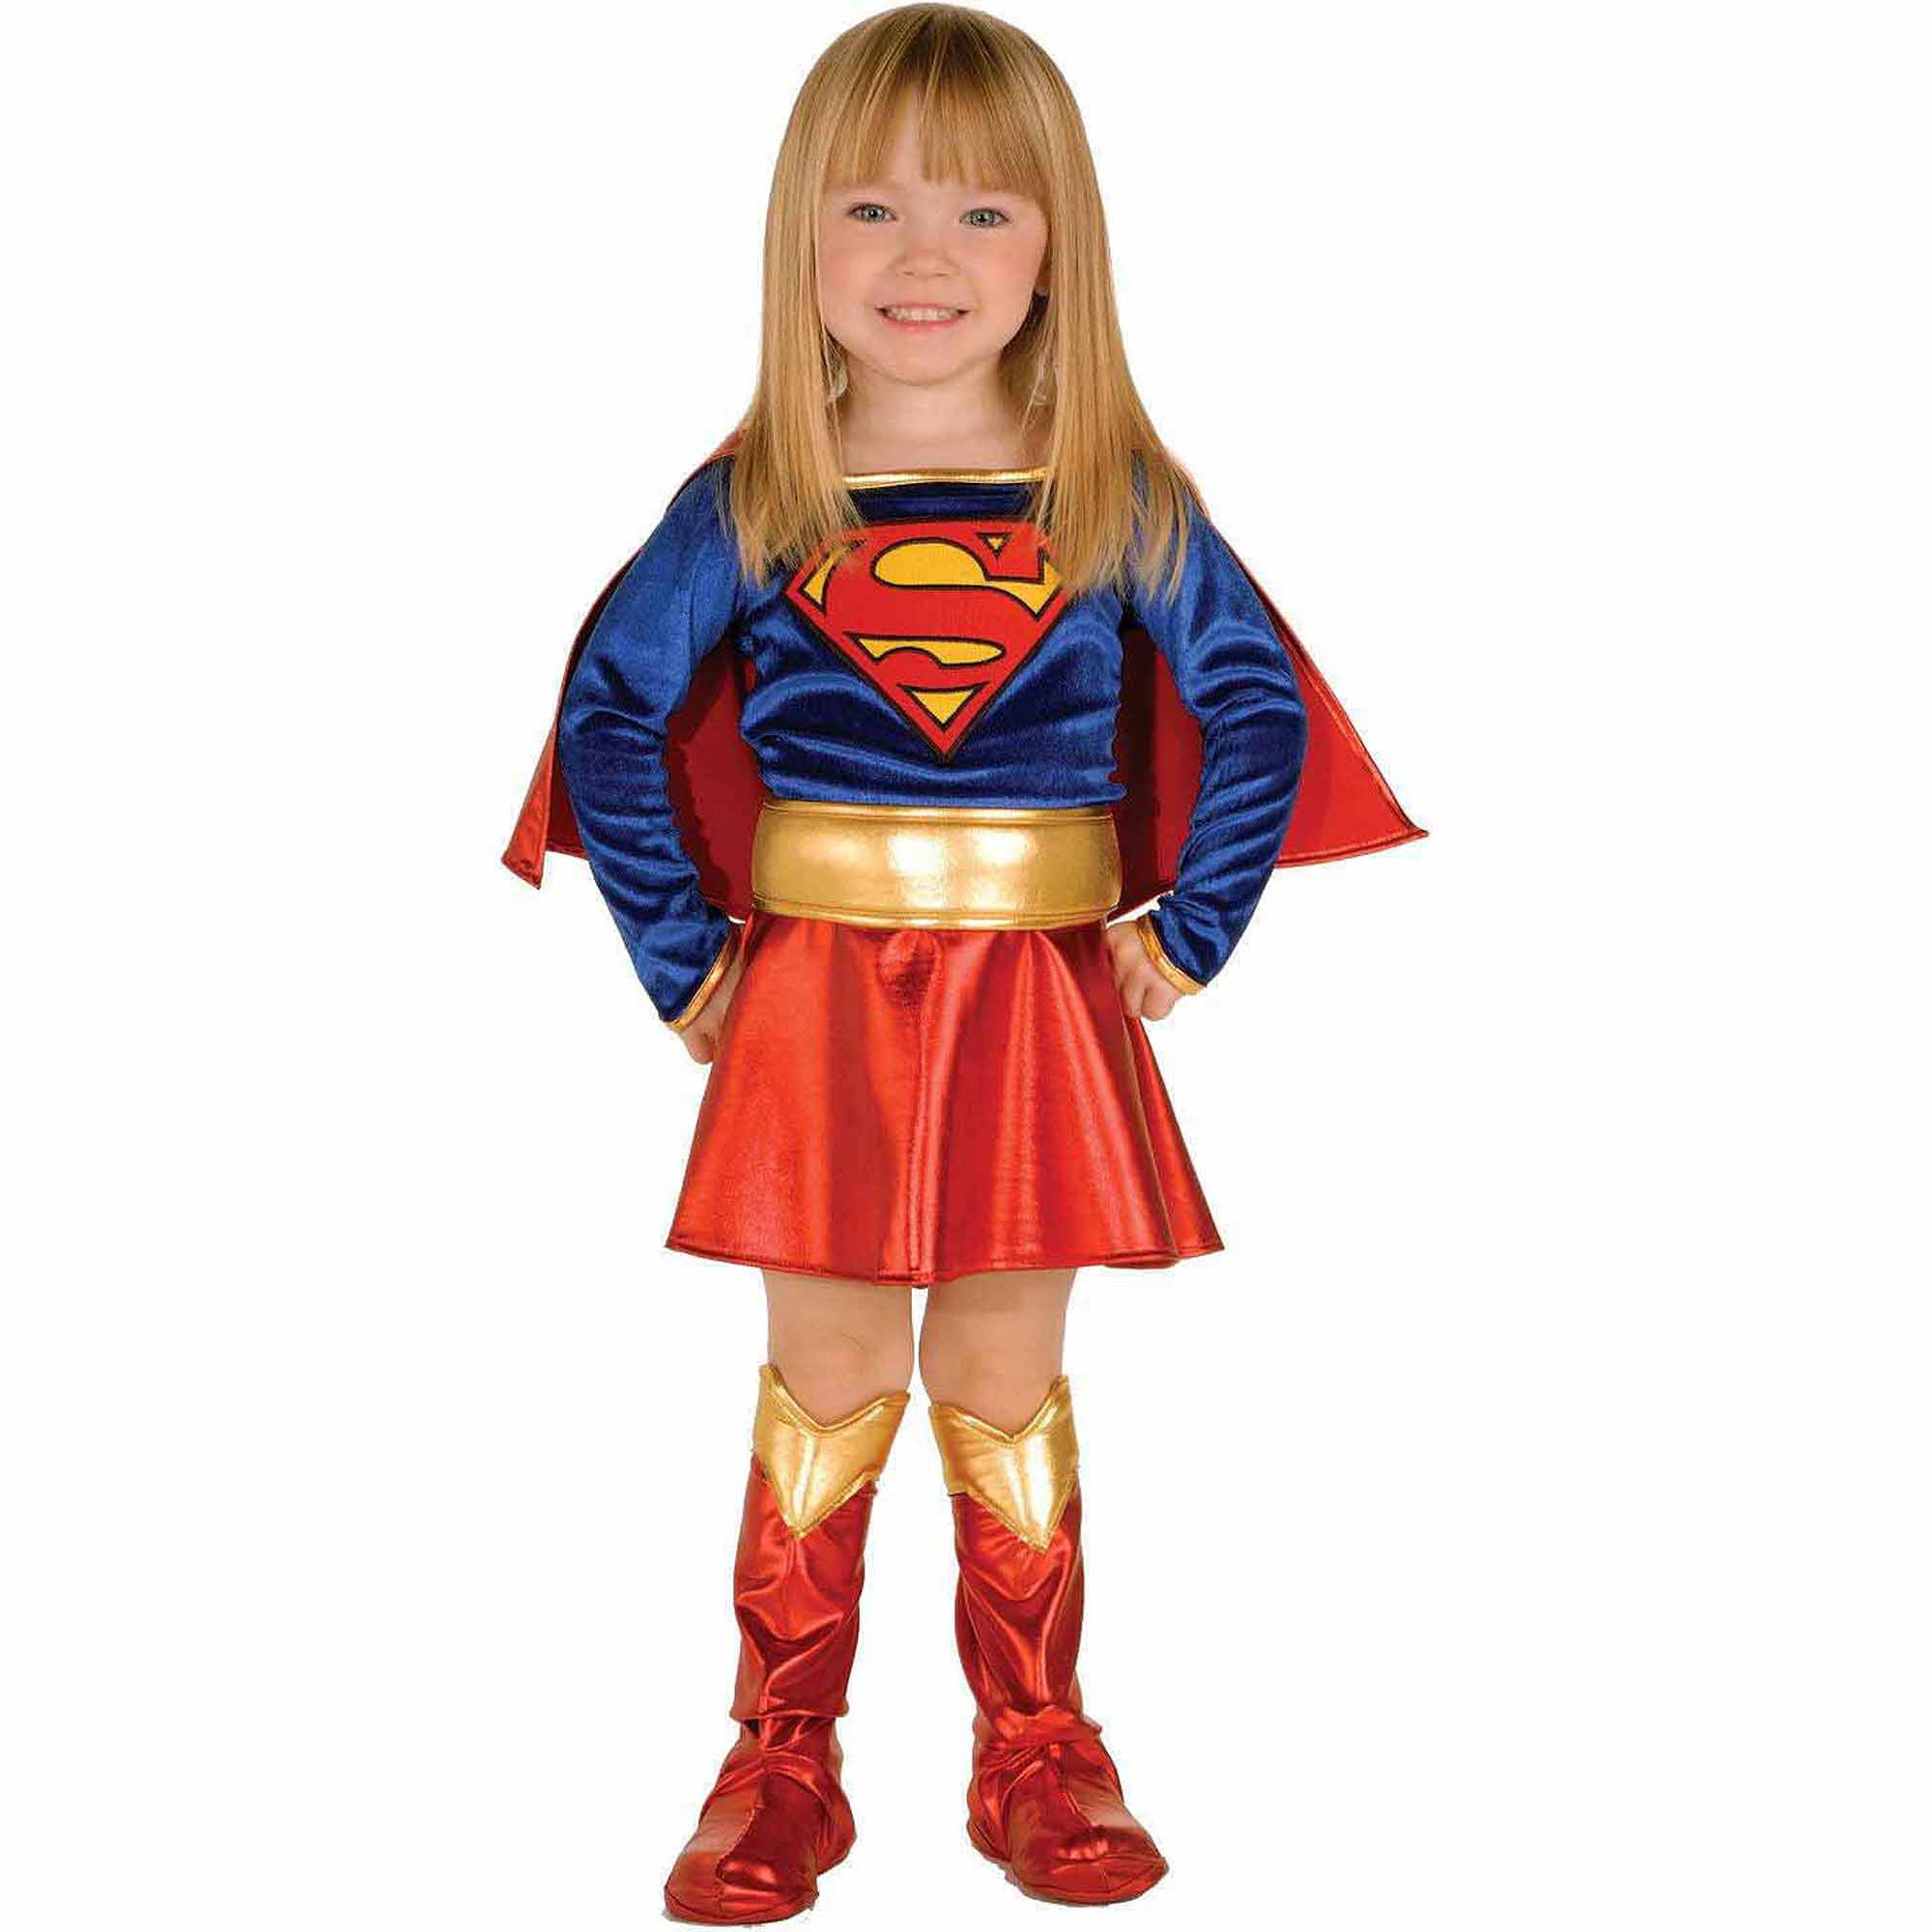 New DC Super Hero SUPERGIRL  Fancy Dress Up Costume For age 4-6 cosplay